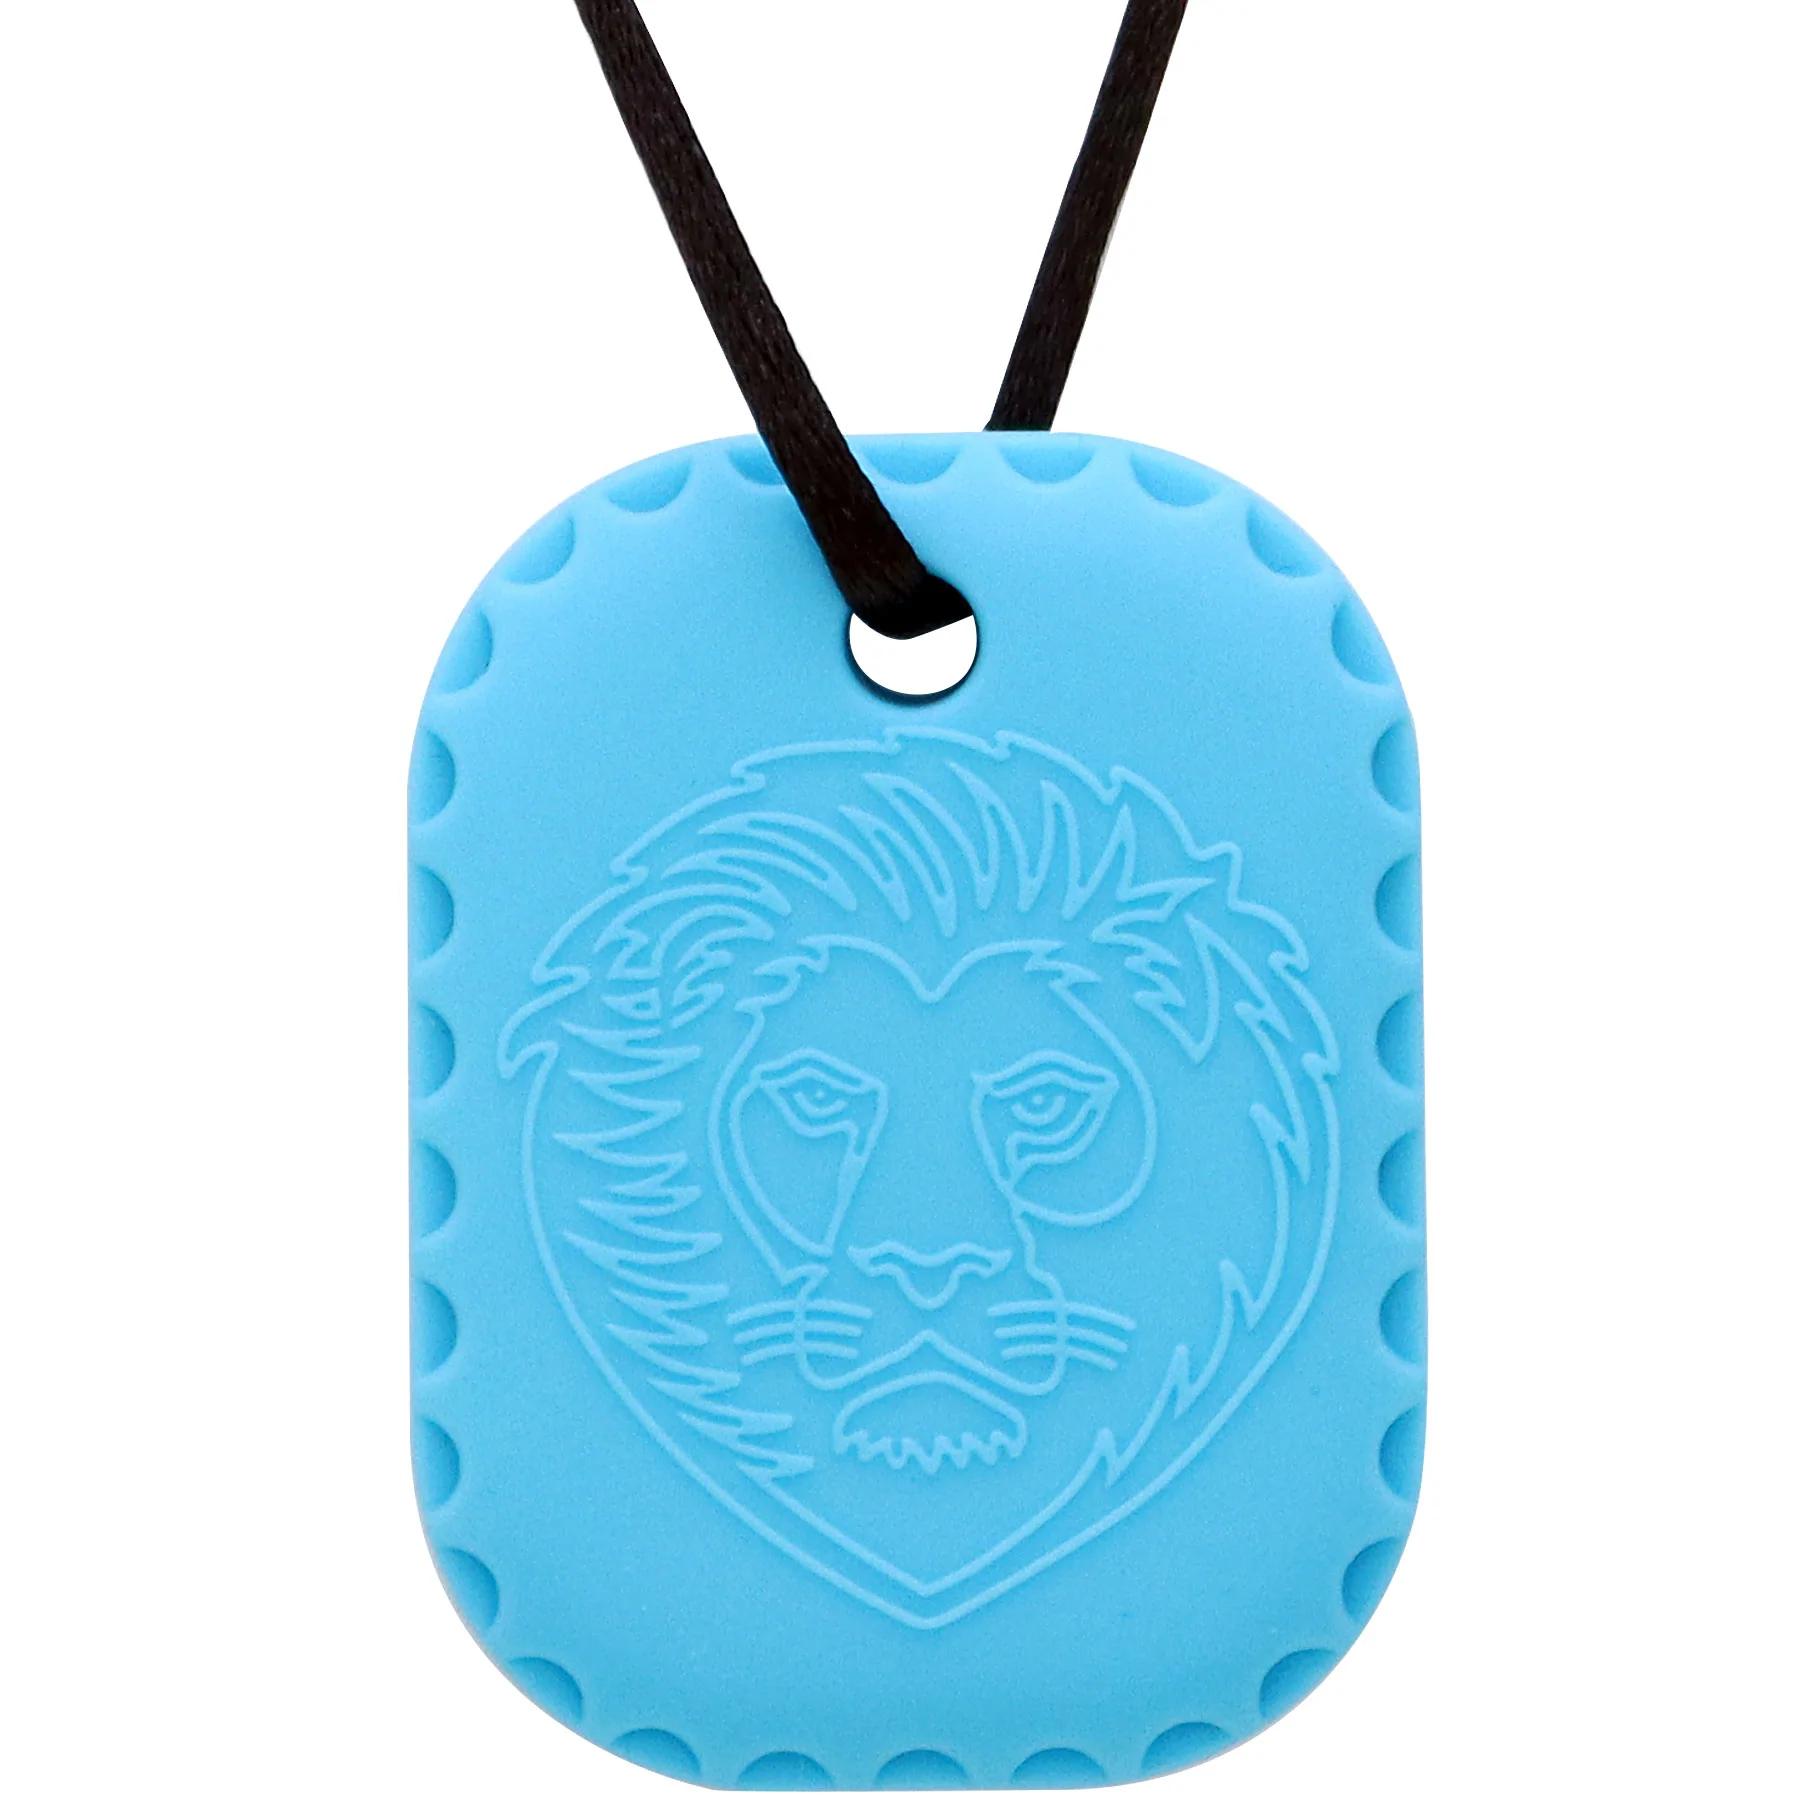 CHUIT Lion Chew Pendant, The CHUIT Lion Chew Pendant is a cool solution for children who need a sensory outlet when feeling nervous or fidgety.The CHUIT Lion Chew Pendant is perfect for fidgeting hands and chewers.The CHUIT Lion Chew Pendant has been developed for children and adults who seek oral sensory feedback and this chew combines the best in safety and hygiene with textures, different levels of hardness and shapes. Our CHUIT Lion Chew Pendant range is good for: Children with autism or other additiona